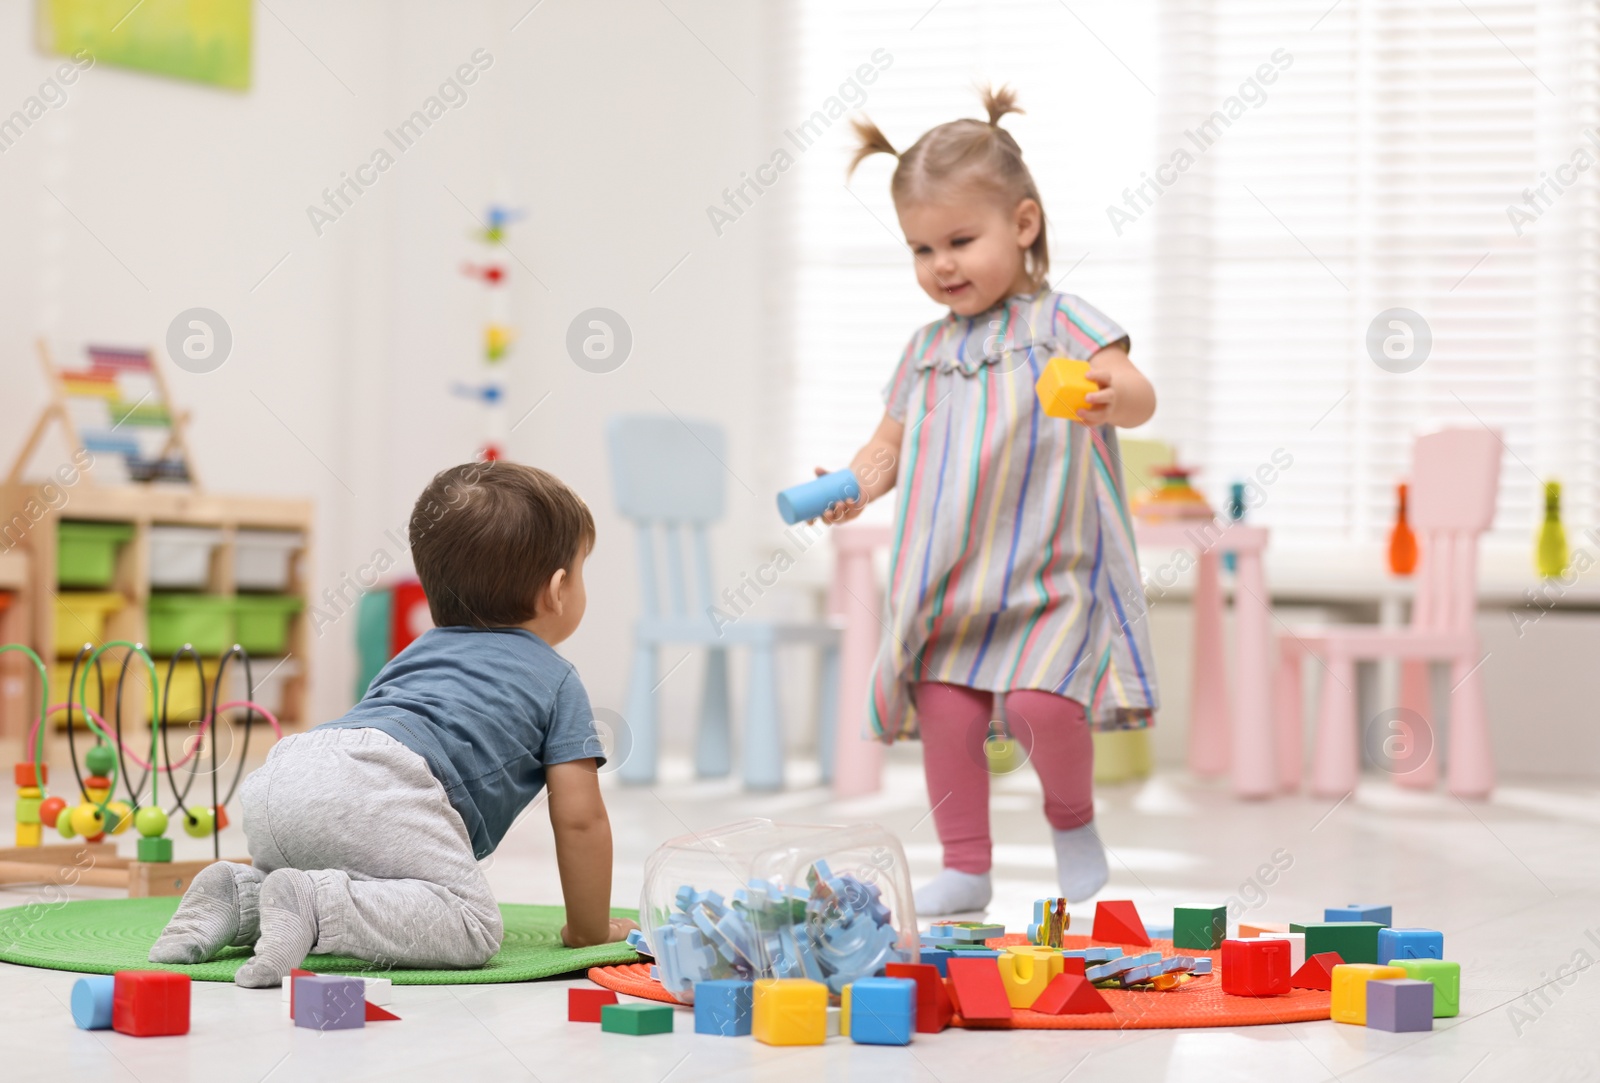 Photo of Cute little children playing together in room